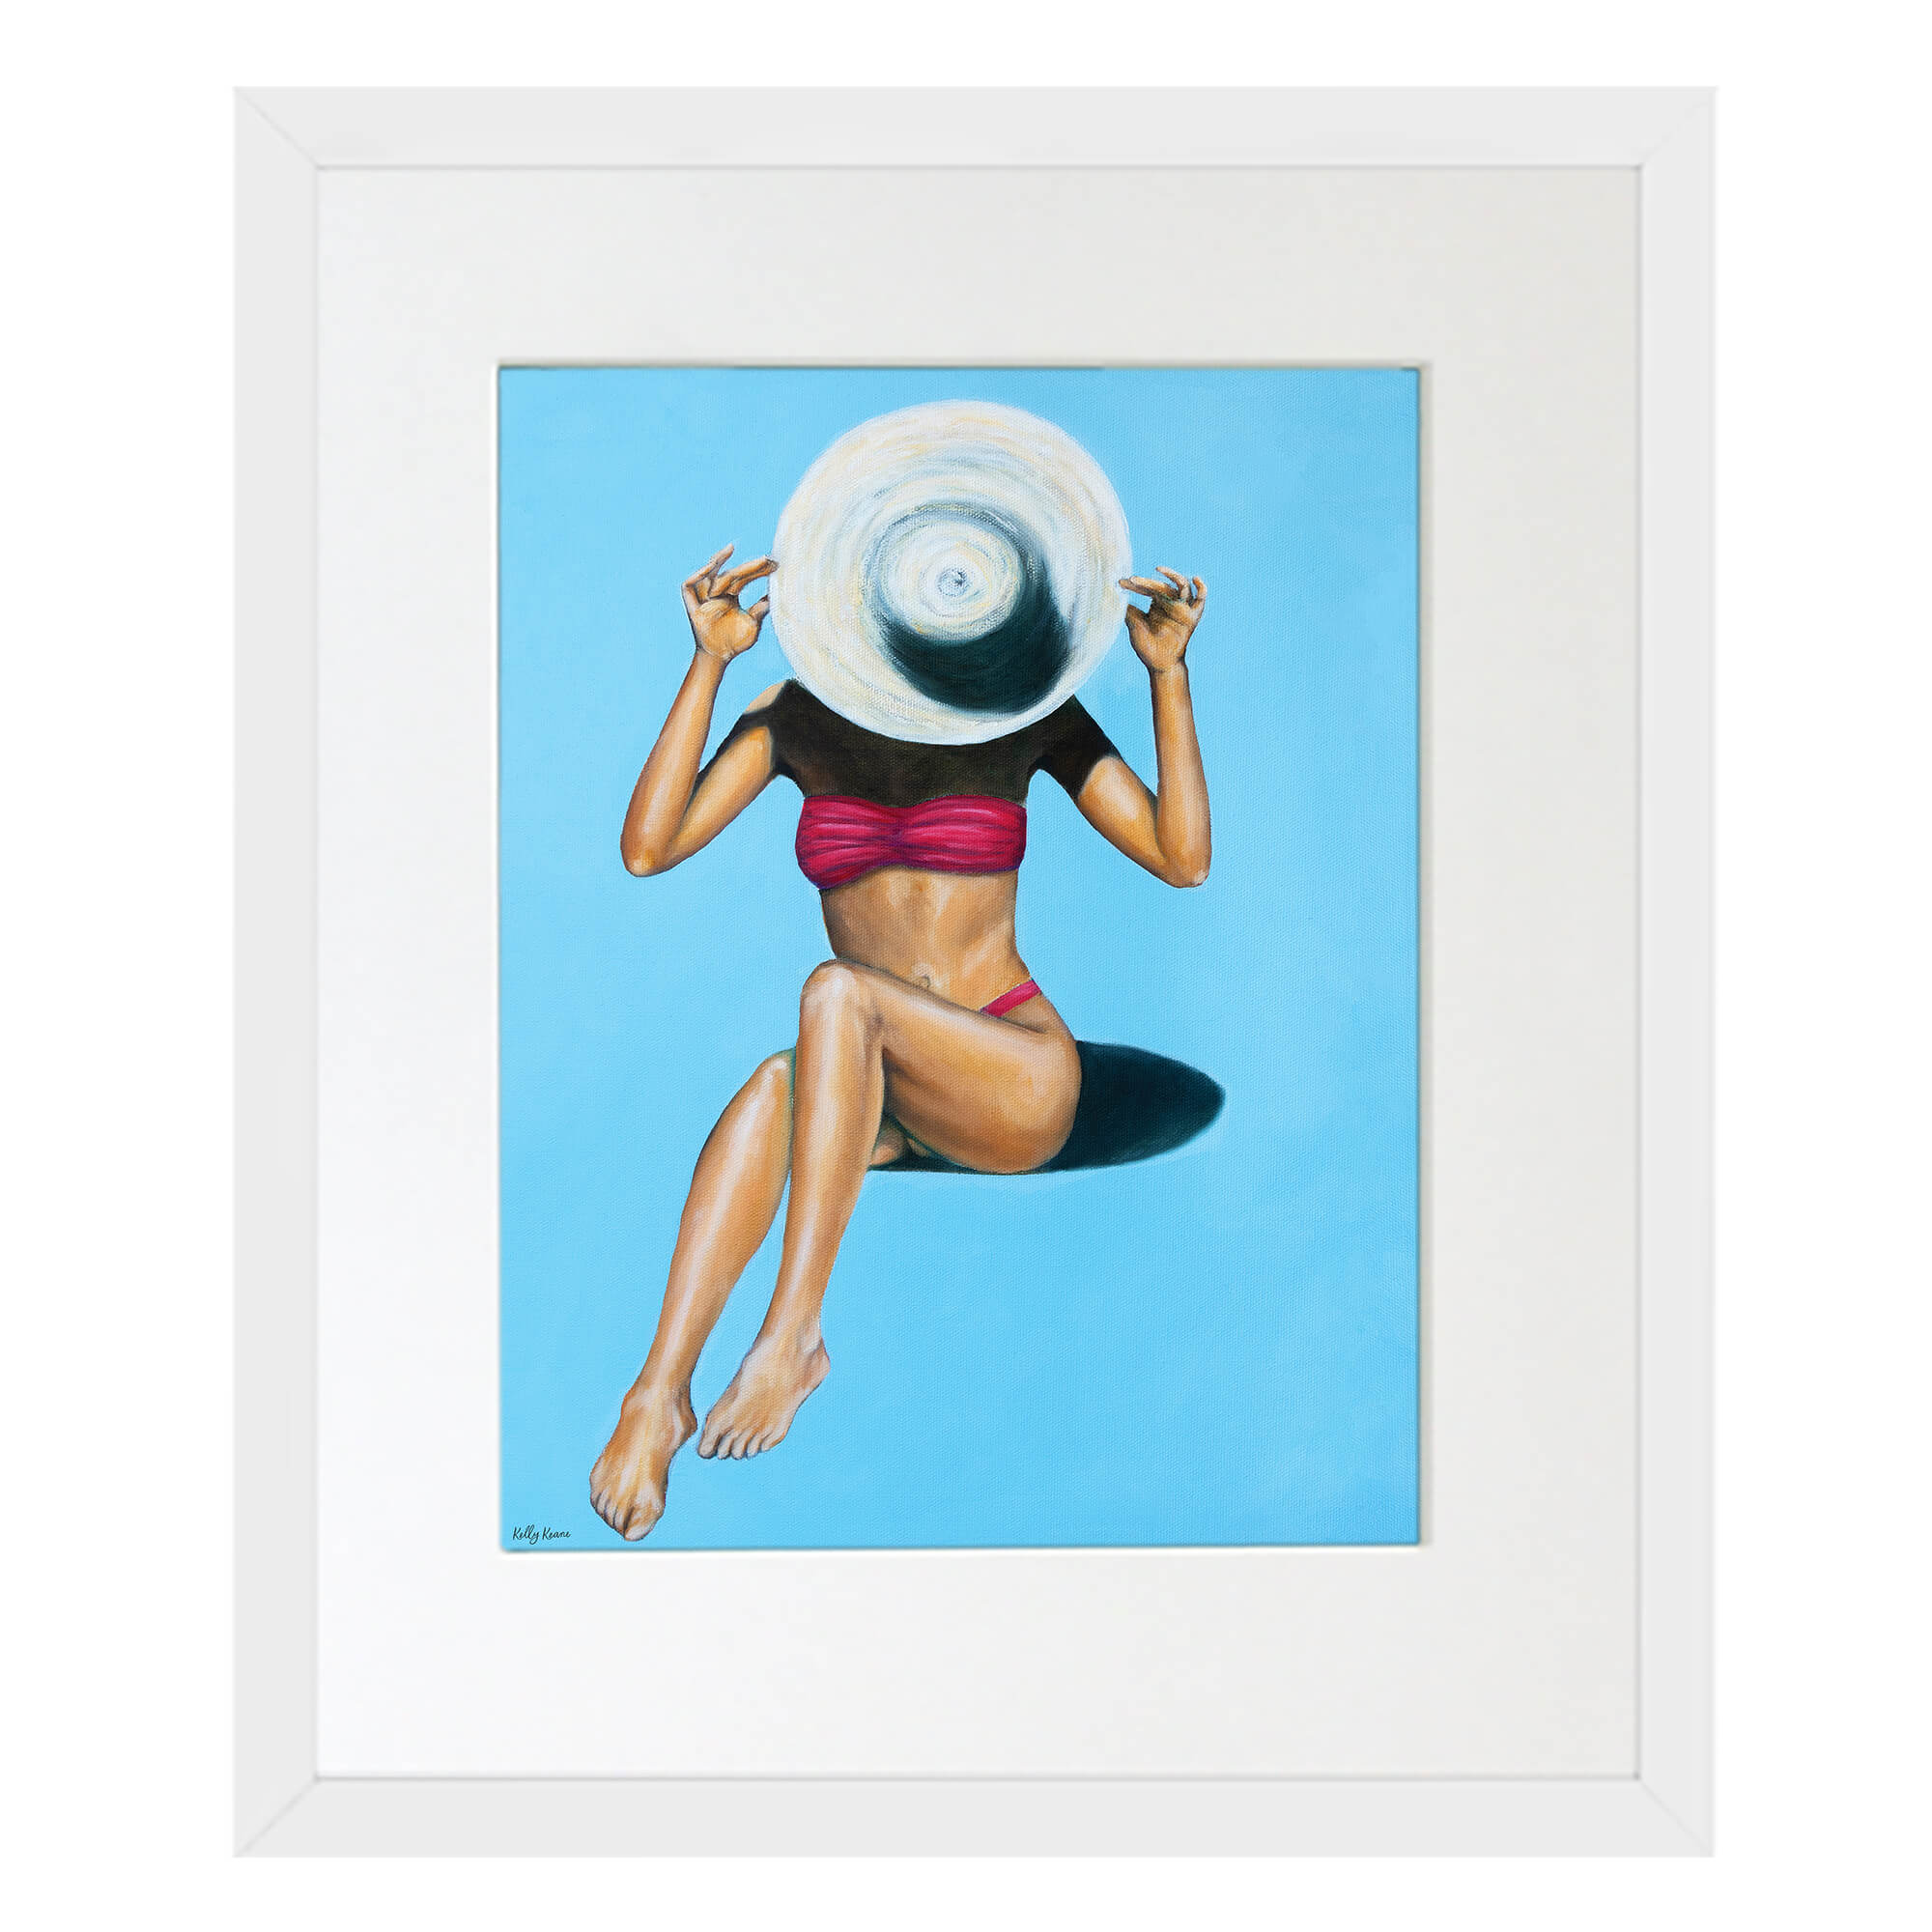 Matted art print of a woman enjoying her time at the beach by Hawaii artist Kelly Keane